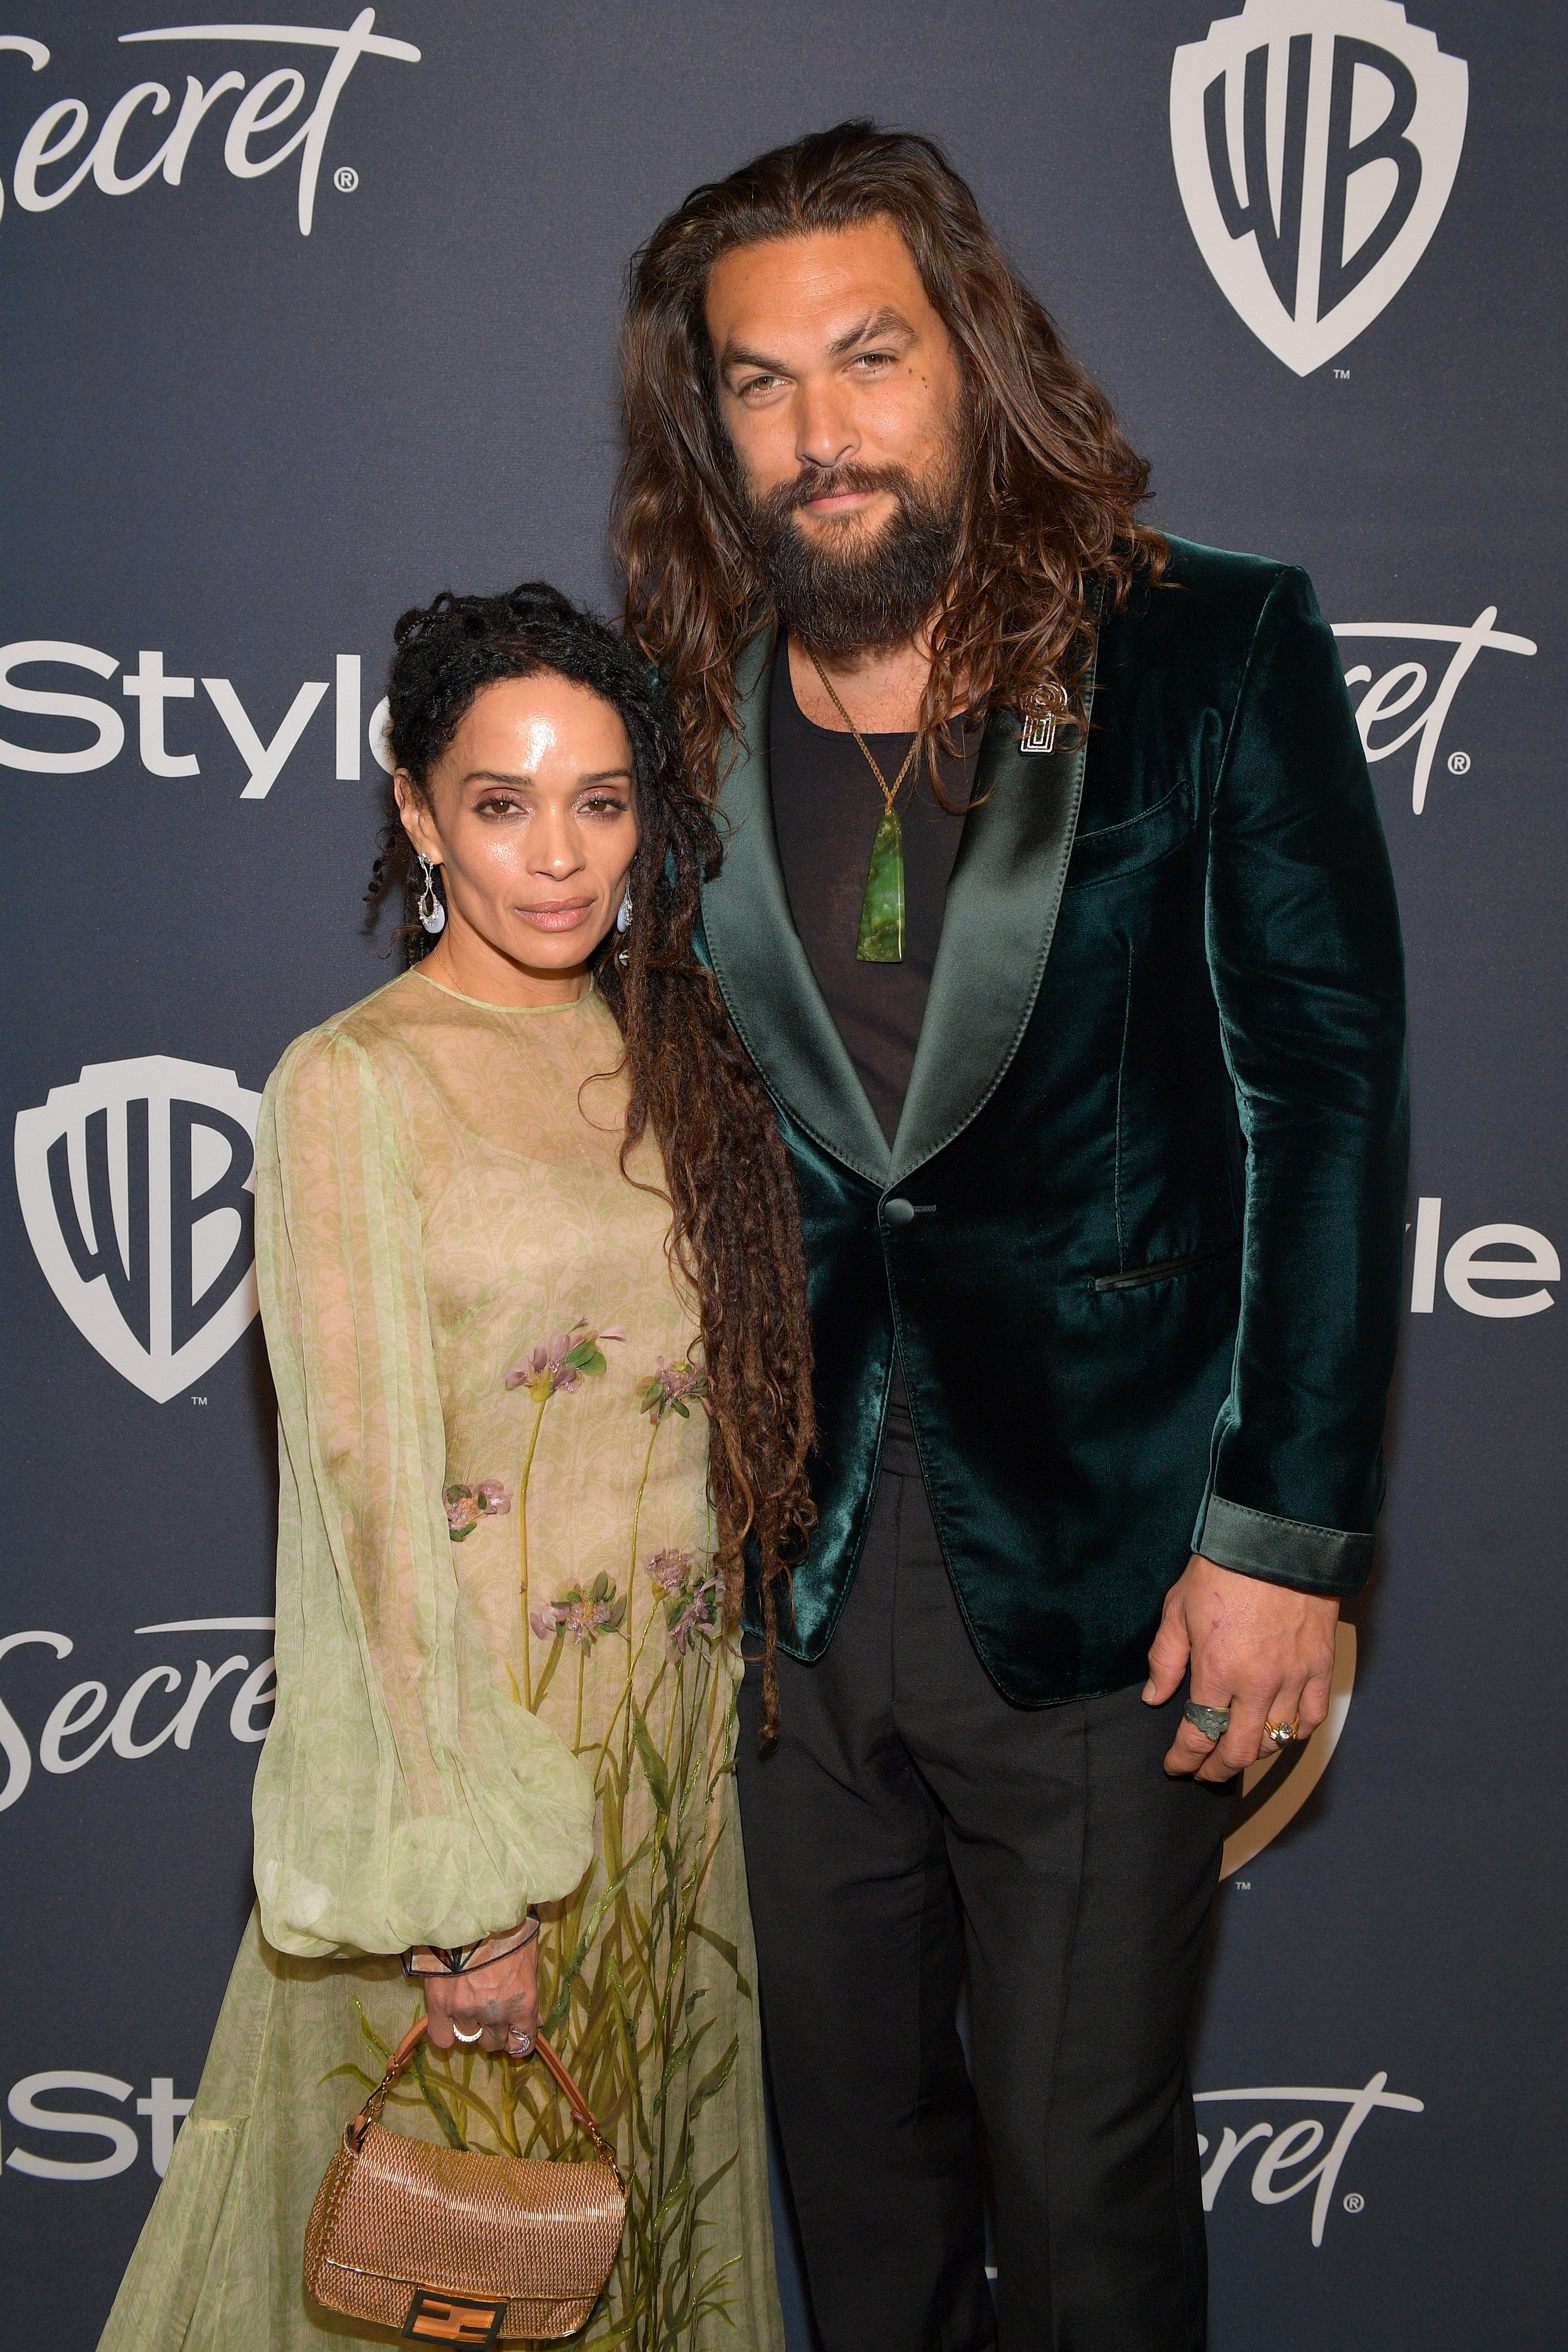 Lisa Bonet and husband Jason Momoa attend The 2020 InStyle and Warner Bros. 77th Annual Golden Globe Awards post-party at The Beverly Hilton Hotel on January 05, 2020 in Beverly Hills, California. / Source: Getty Images